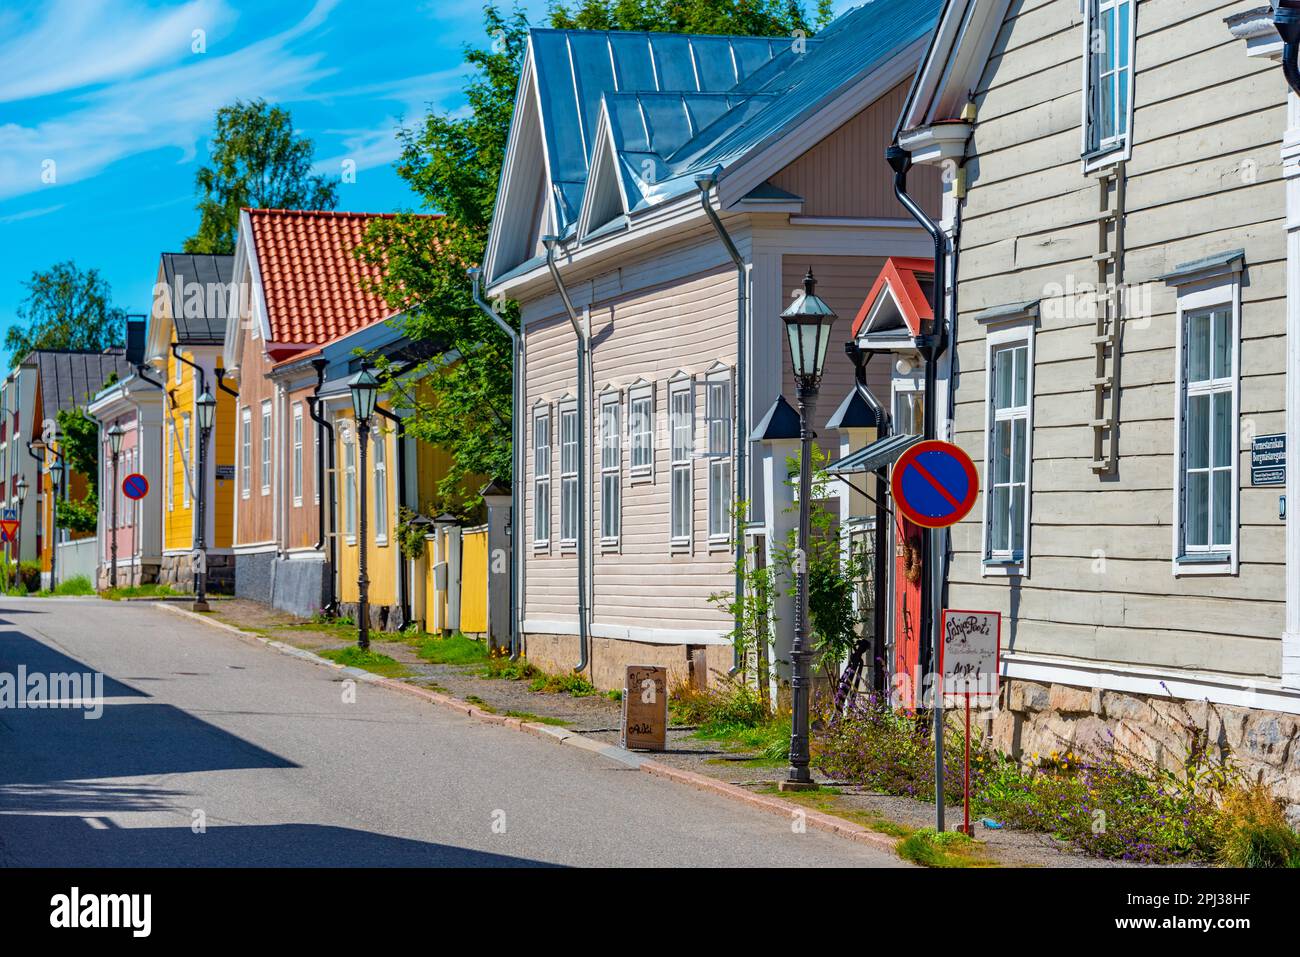 Kokkola, Finland, July 23, 2022: Colorful timber houses in Neristan district of Finnish town Kokkola. Stock Photo